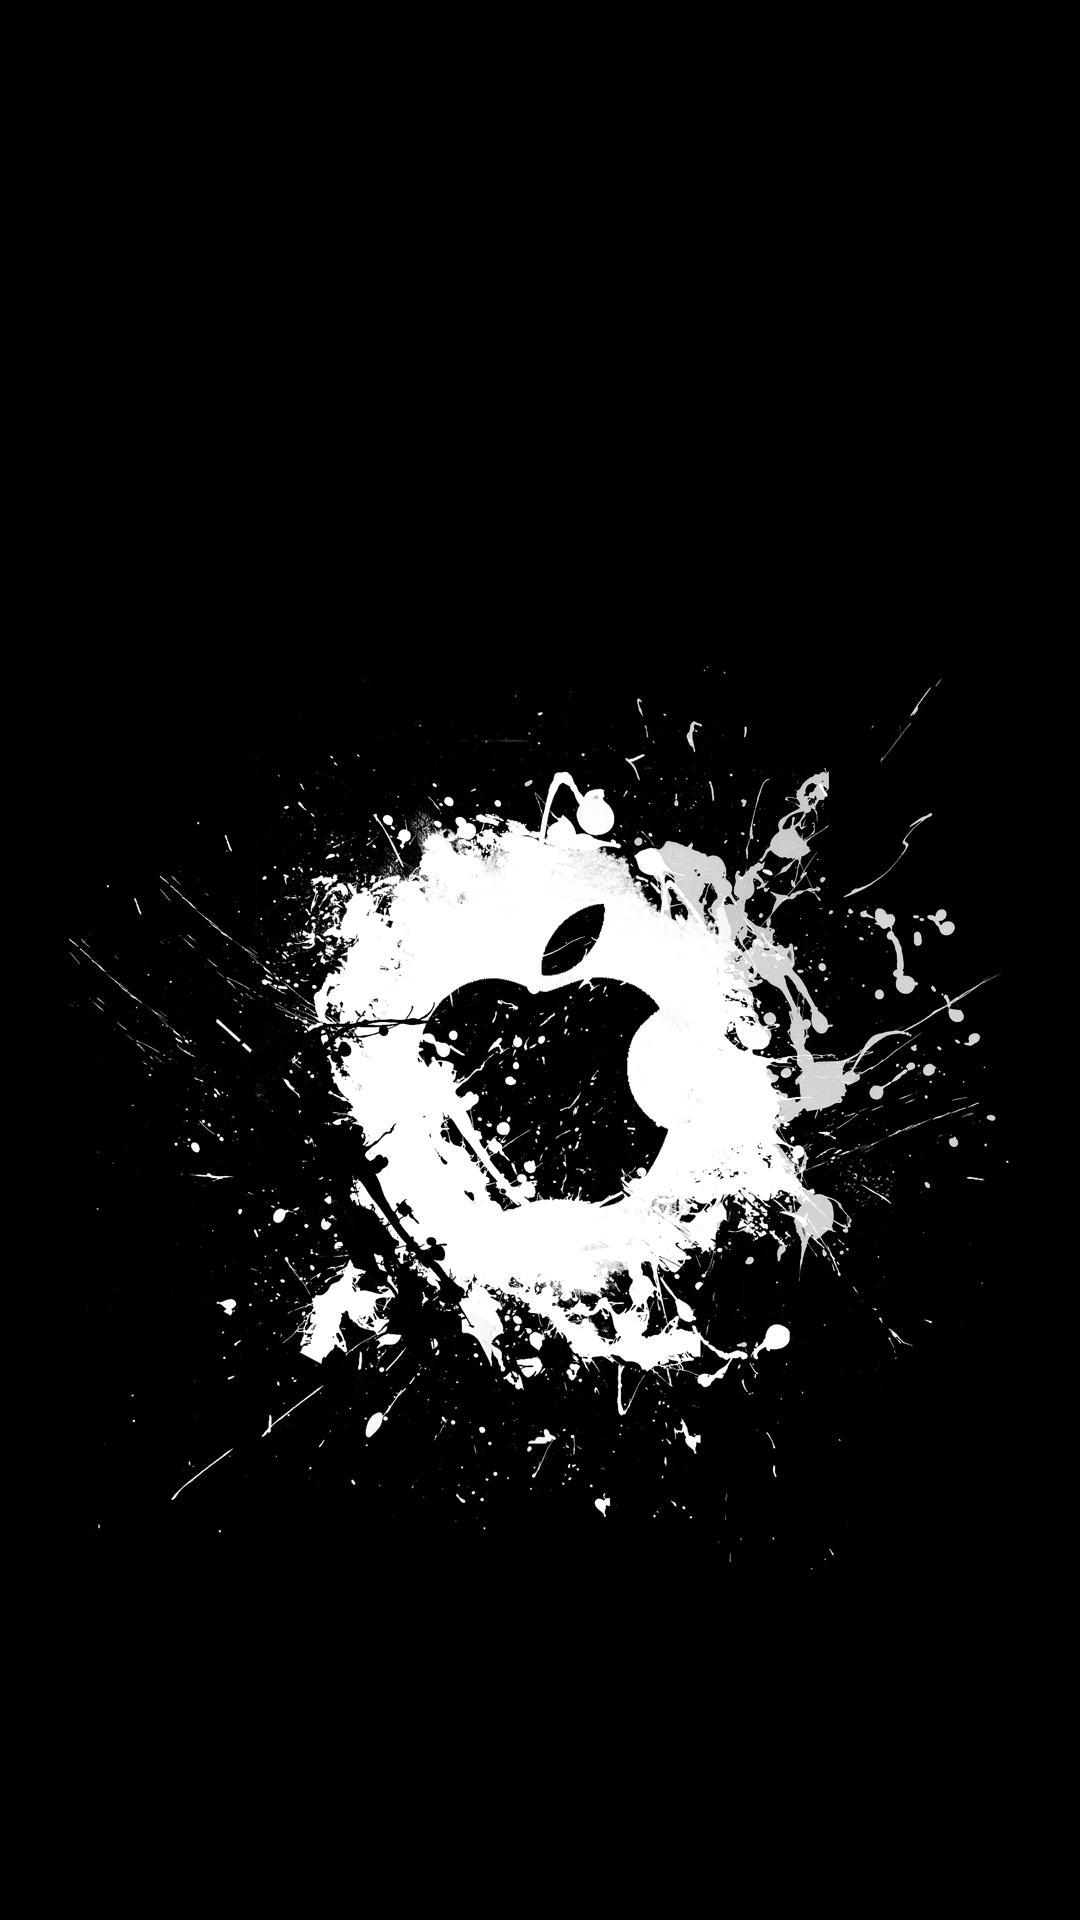 Wallpaper For Iphone 7 Black Wallpapers